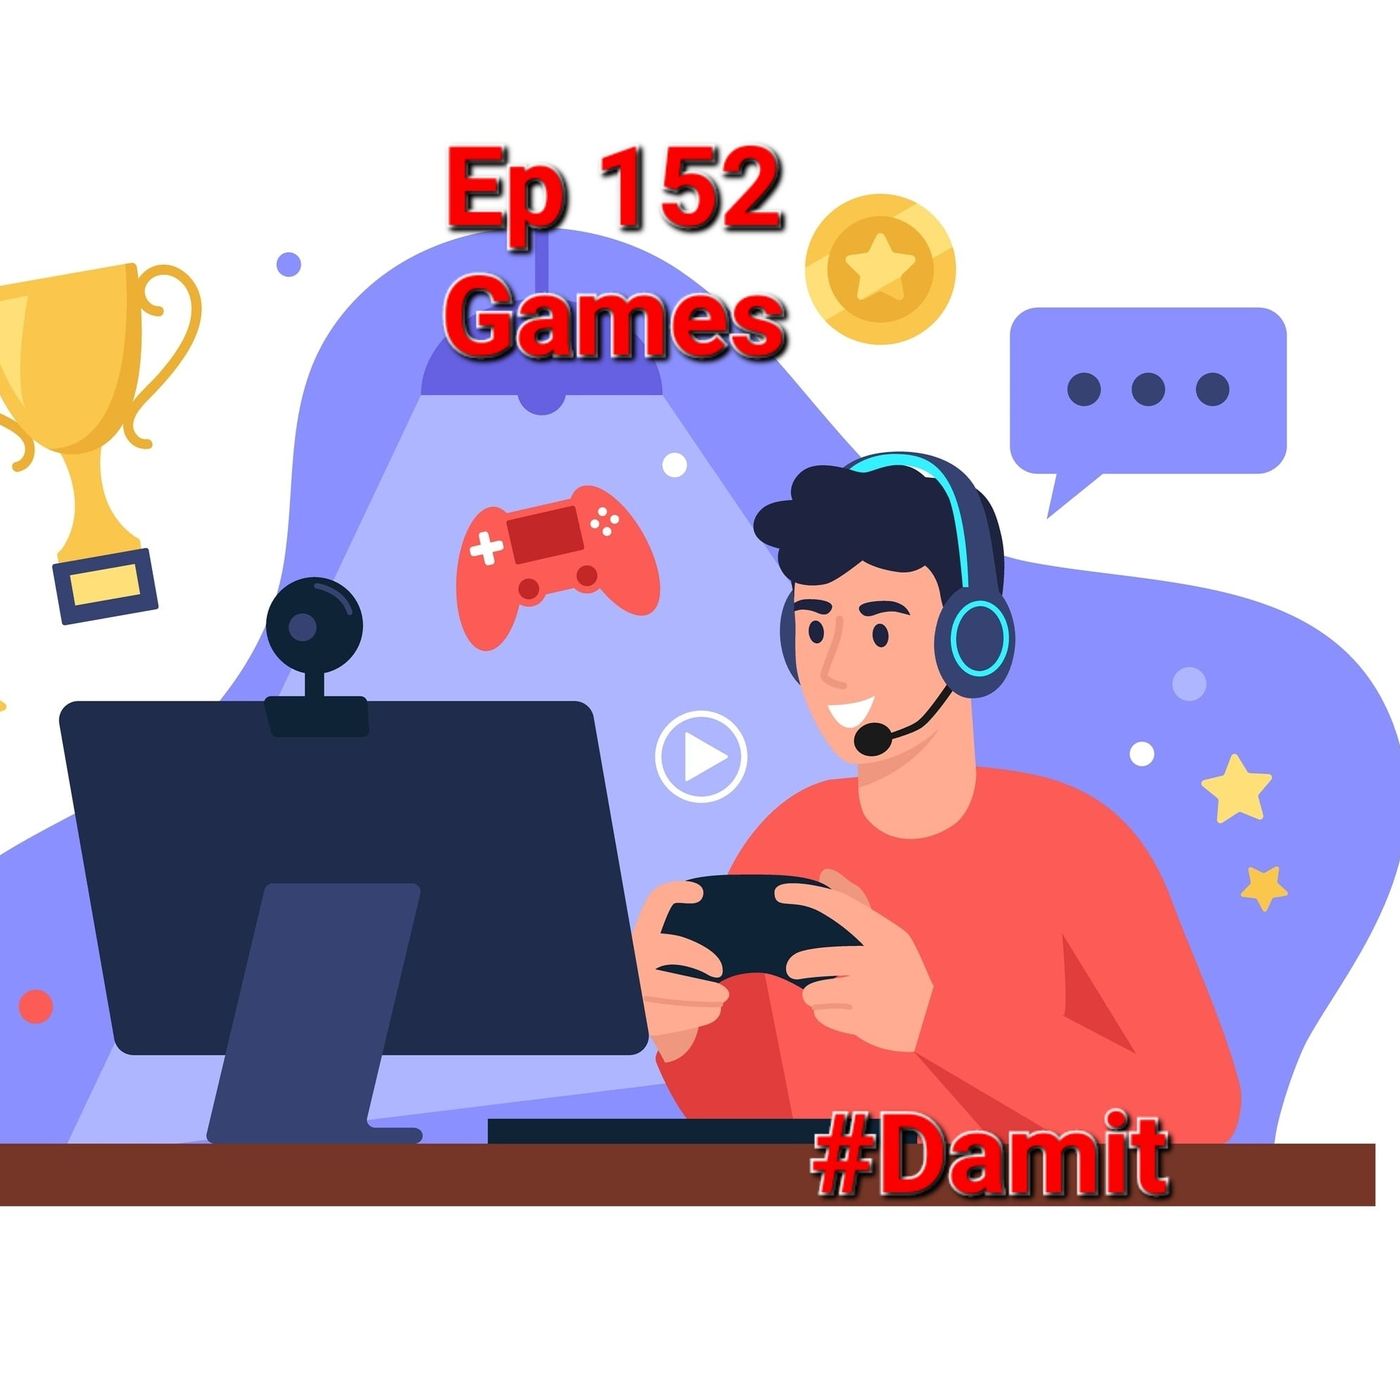 Ep 152 Games